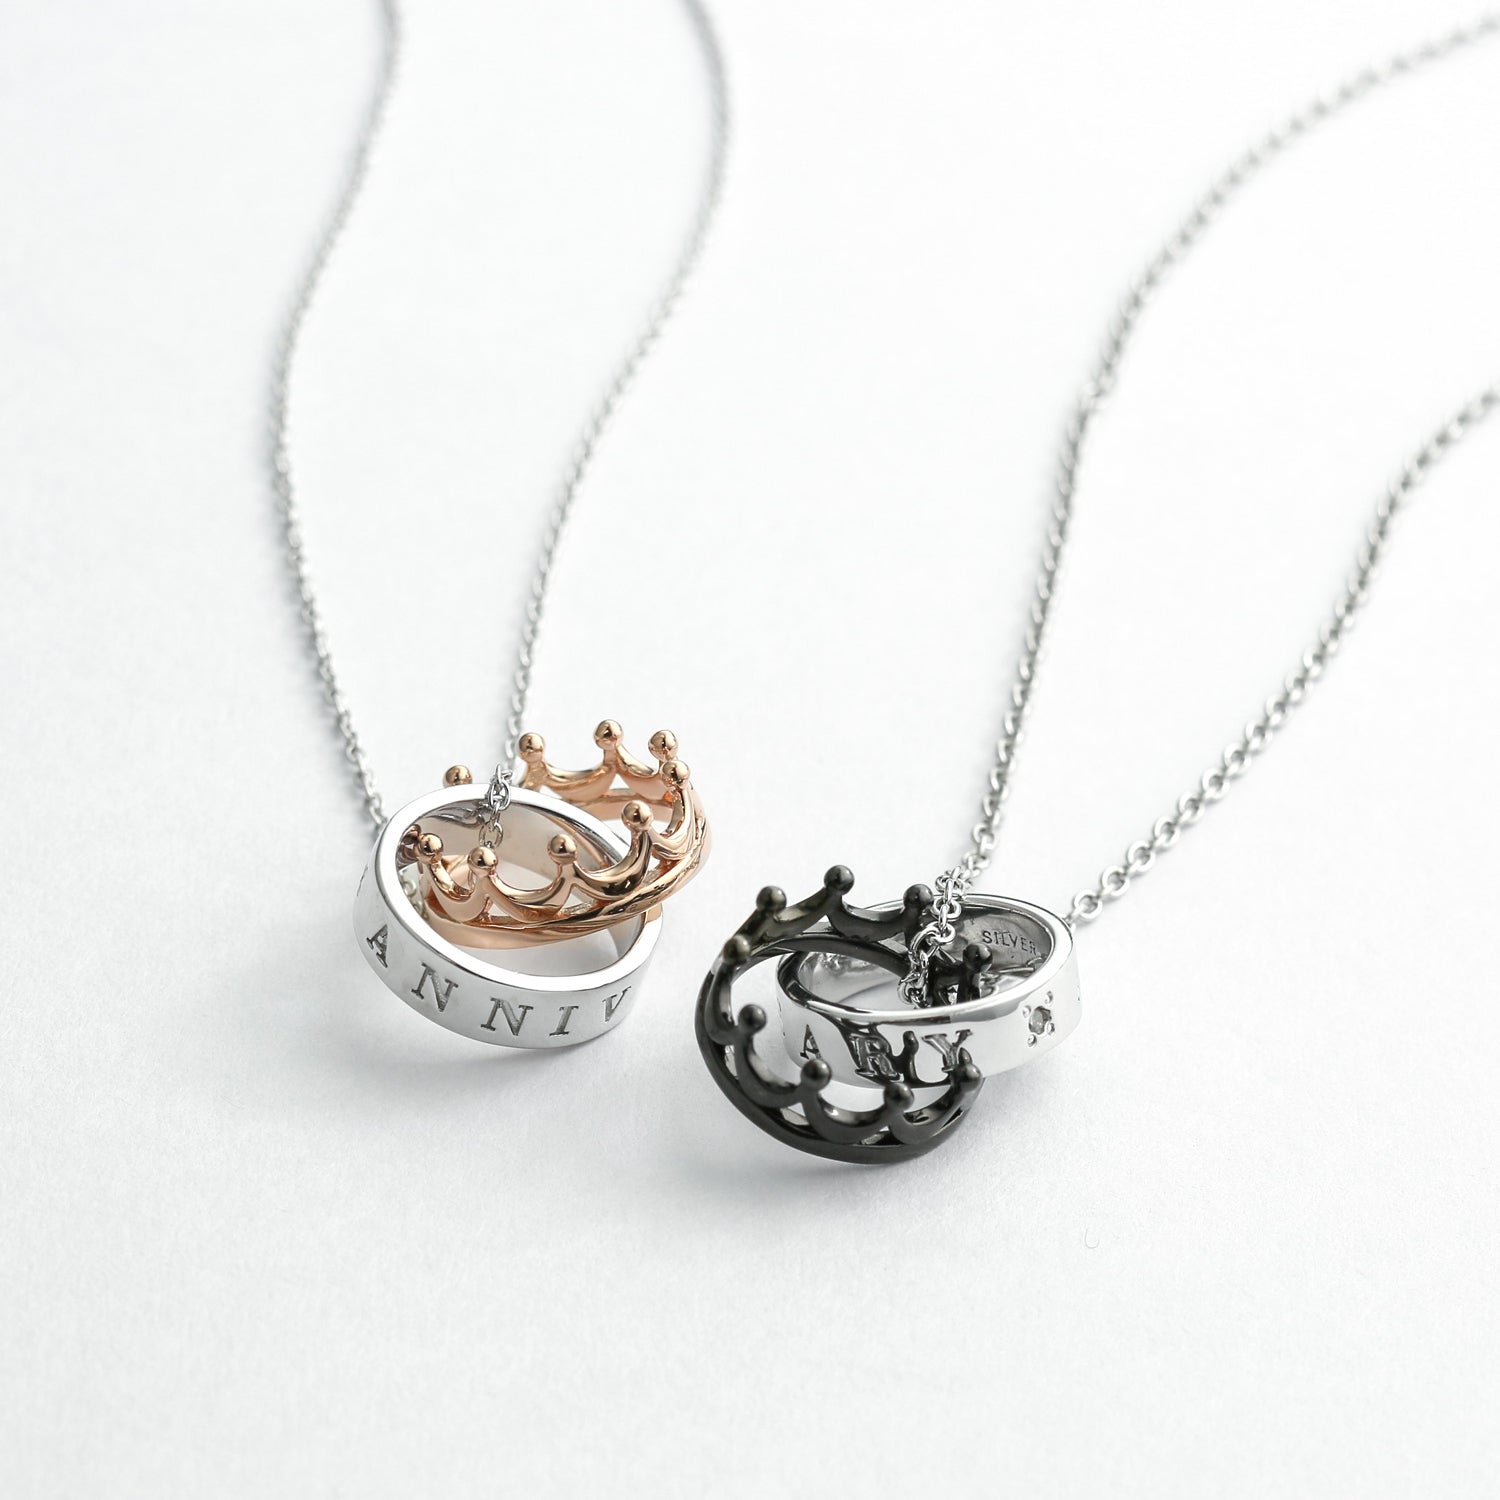 Pair necklace | 95-2240-2241